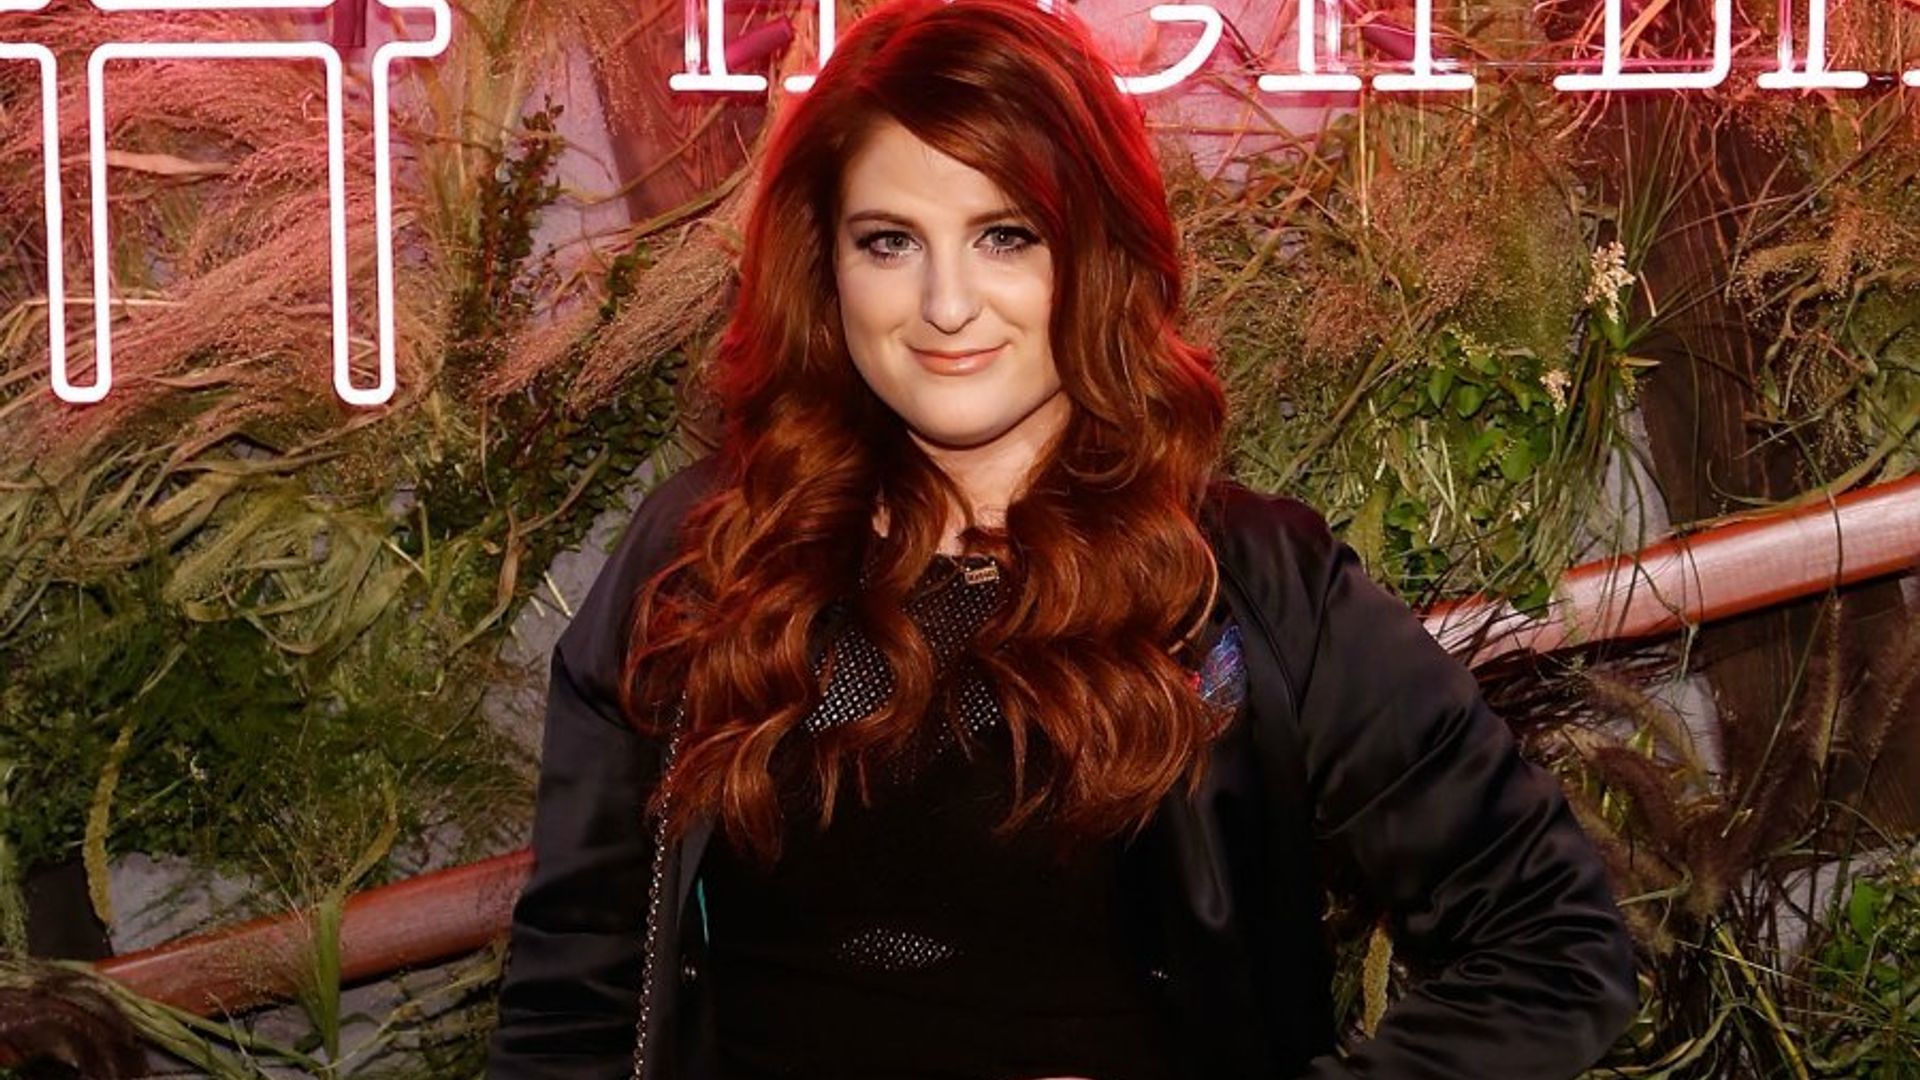 ​Meghan Trainor is all about being a role model and champion for body confidence